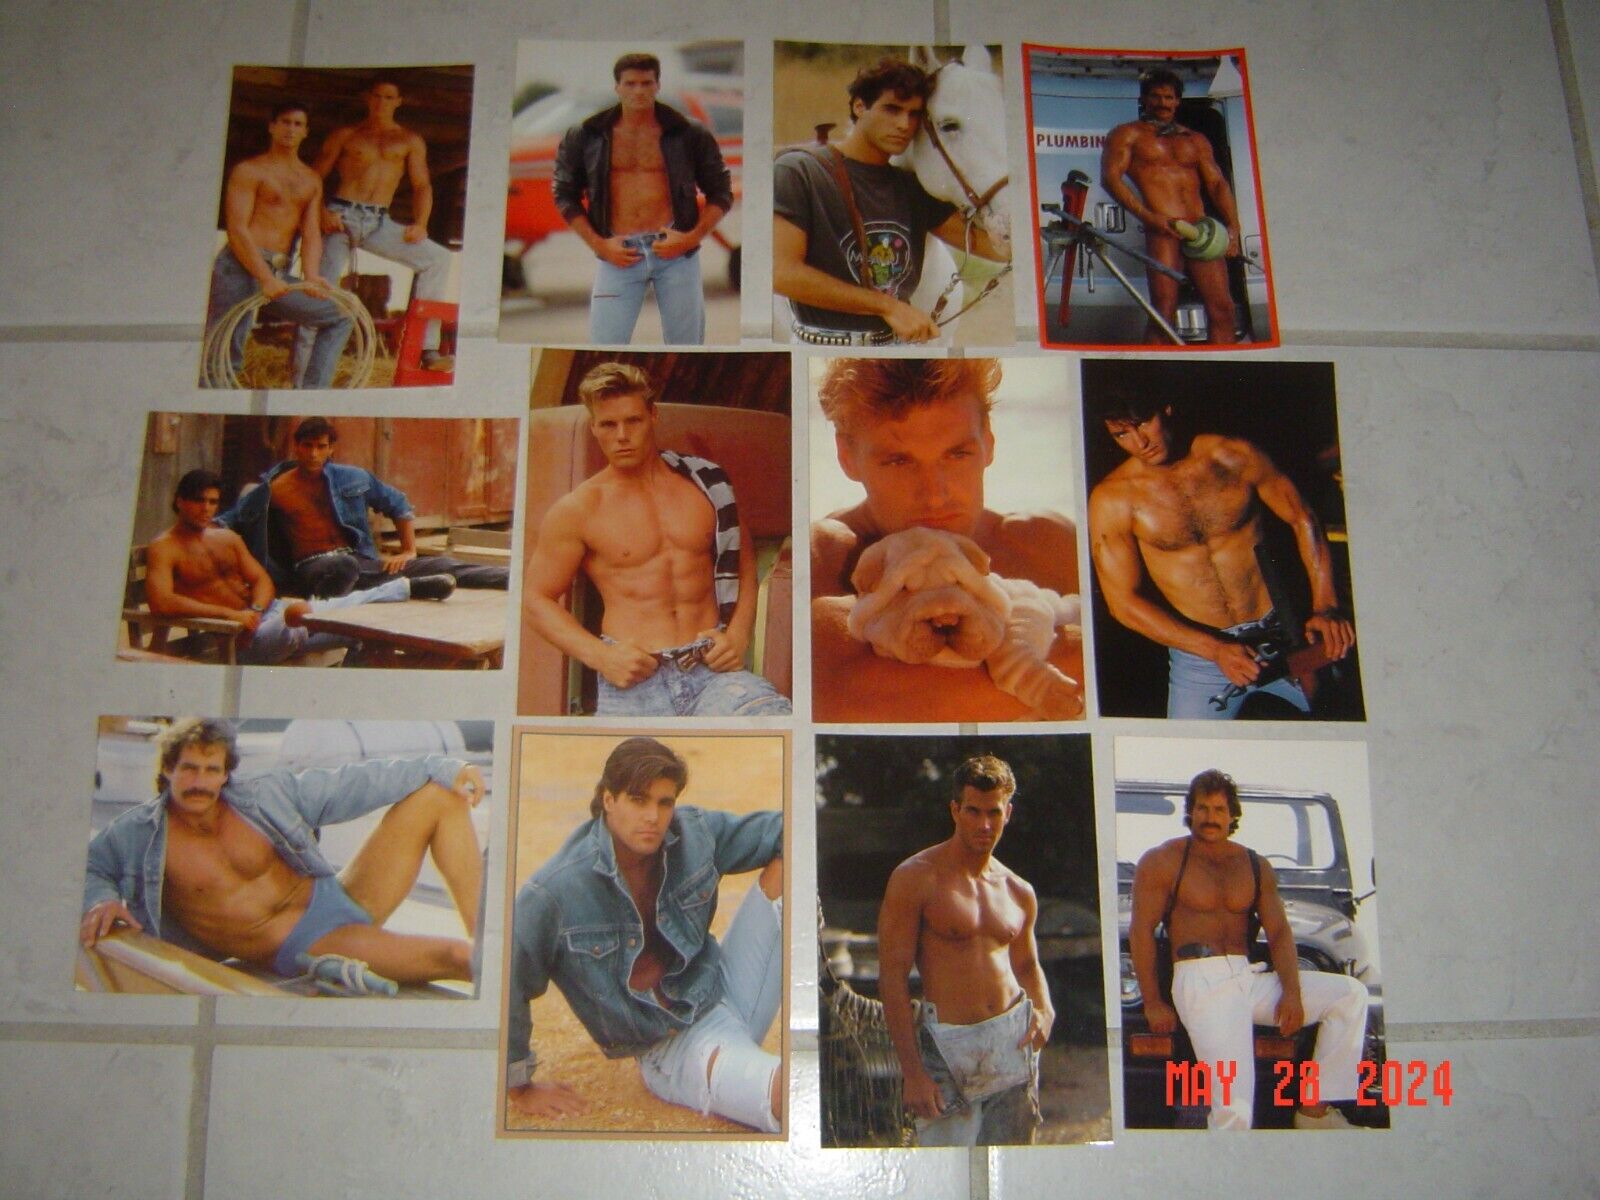 Hot Bods Postcards, Lot of 12 Sexy Hard-Working and Handsome Men Swimsuit Models